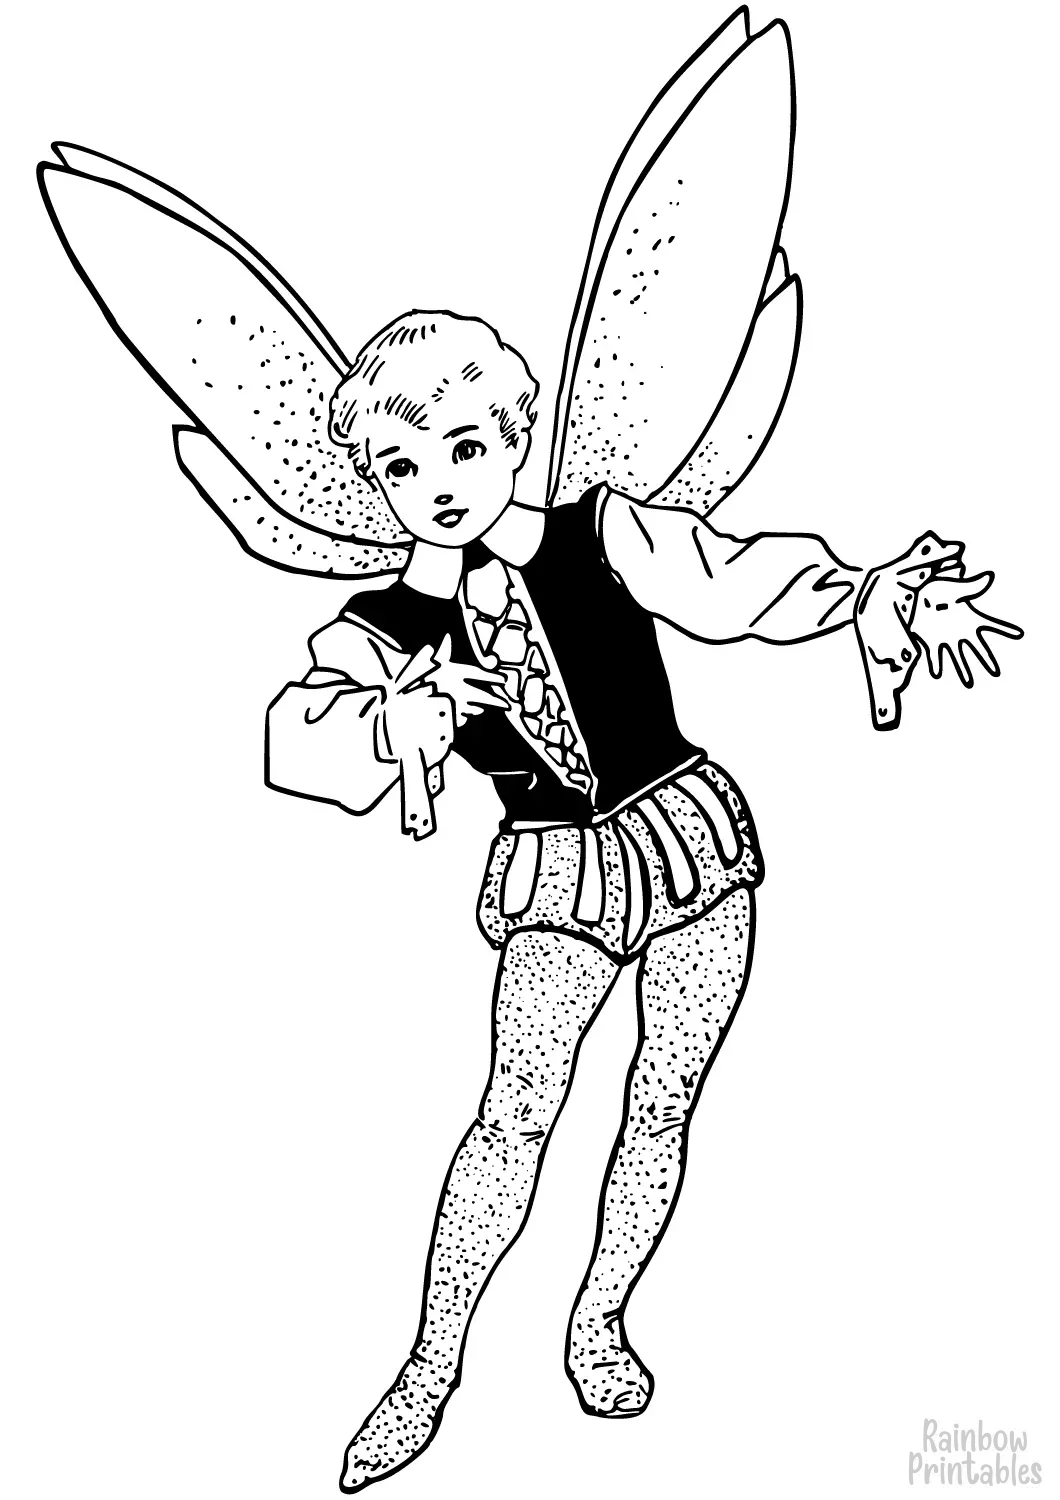 Vintage Cute Christmas Xmas Boy Fairy Line Drawing Coloring Page Activity for Kids